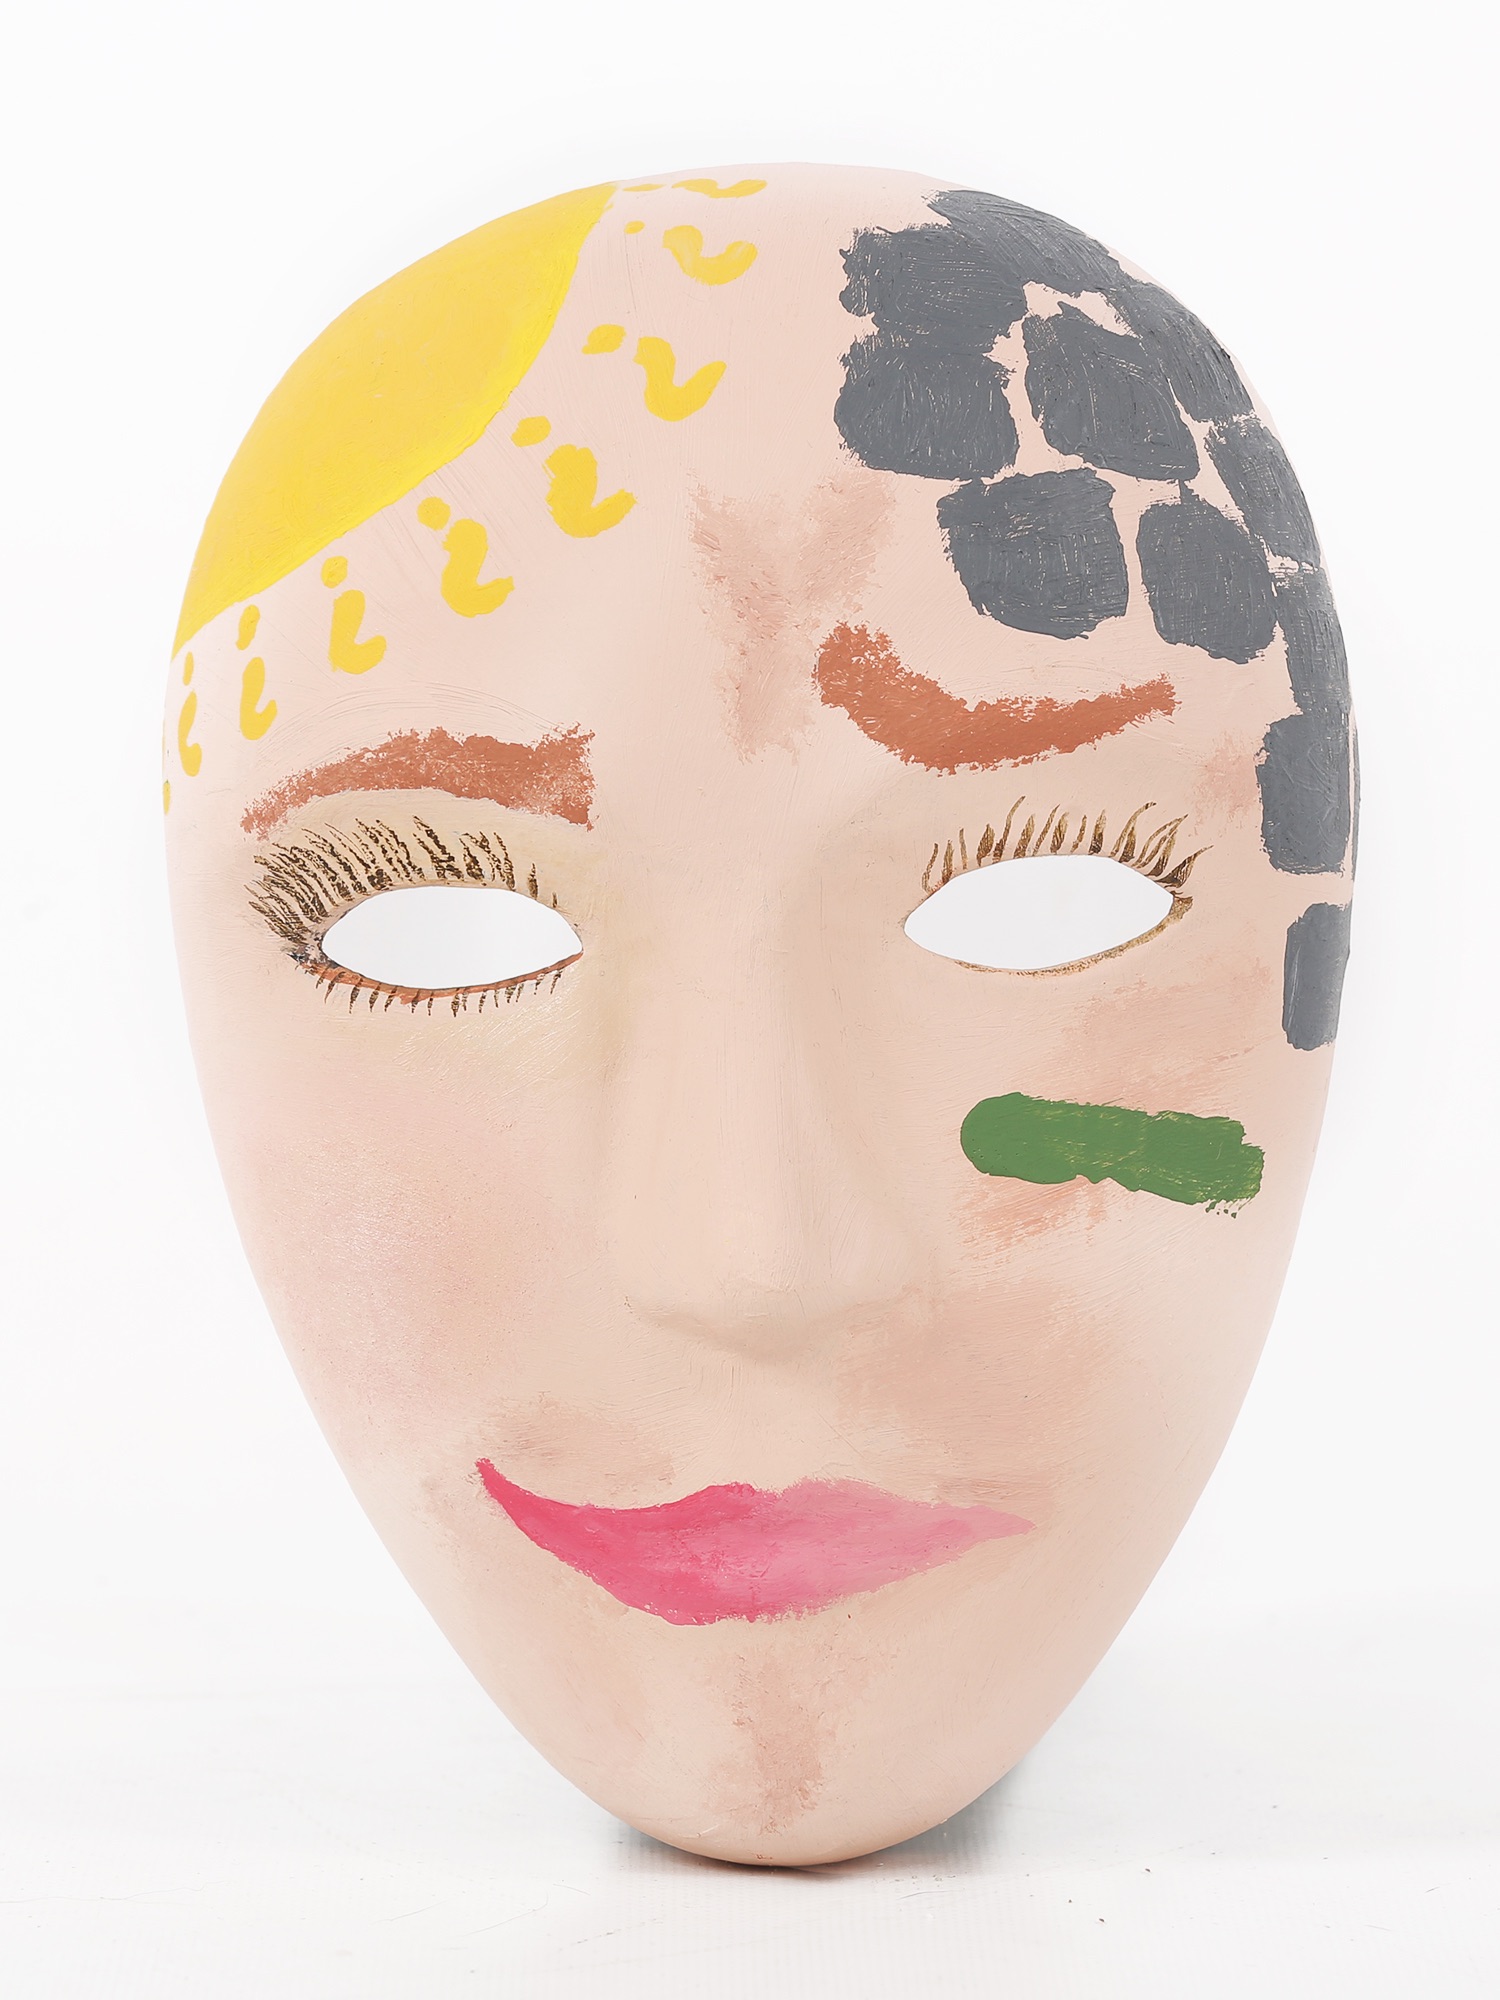 A mask painted like a woman's face, with what appear to be bricks covering the left side of her head and a sun on the right side.